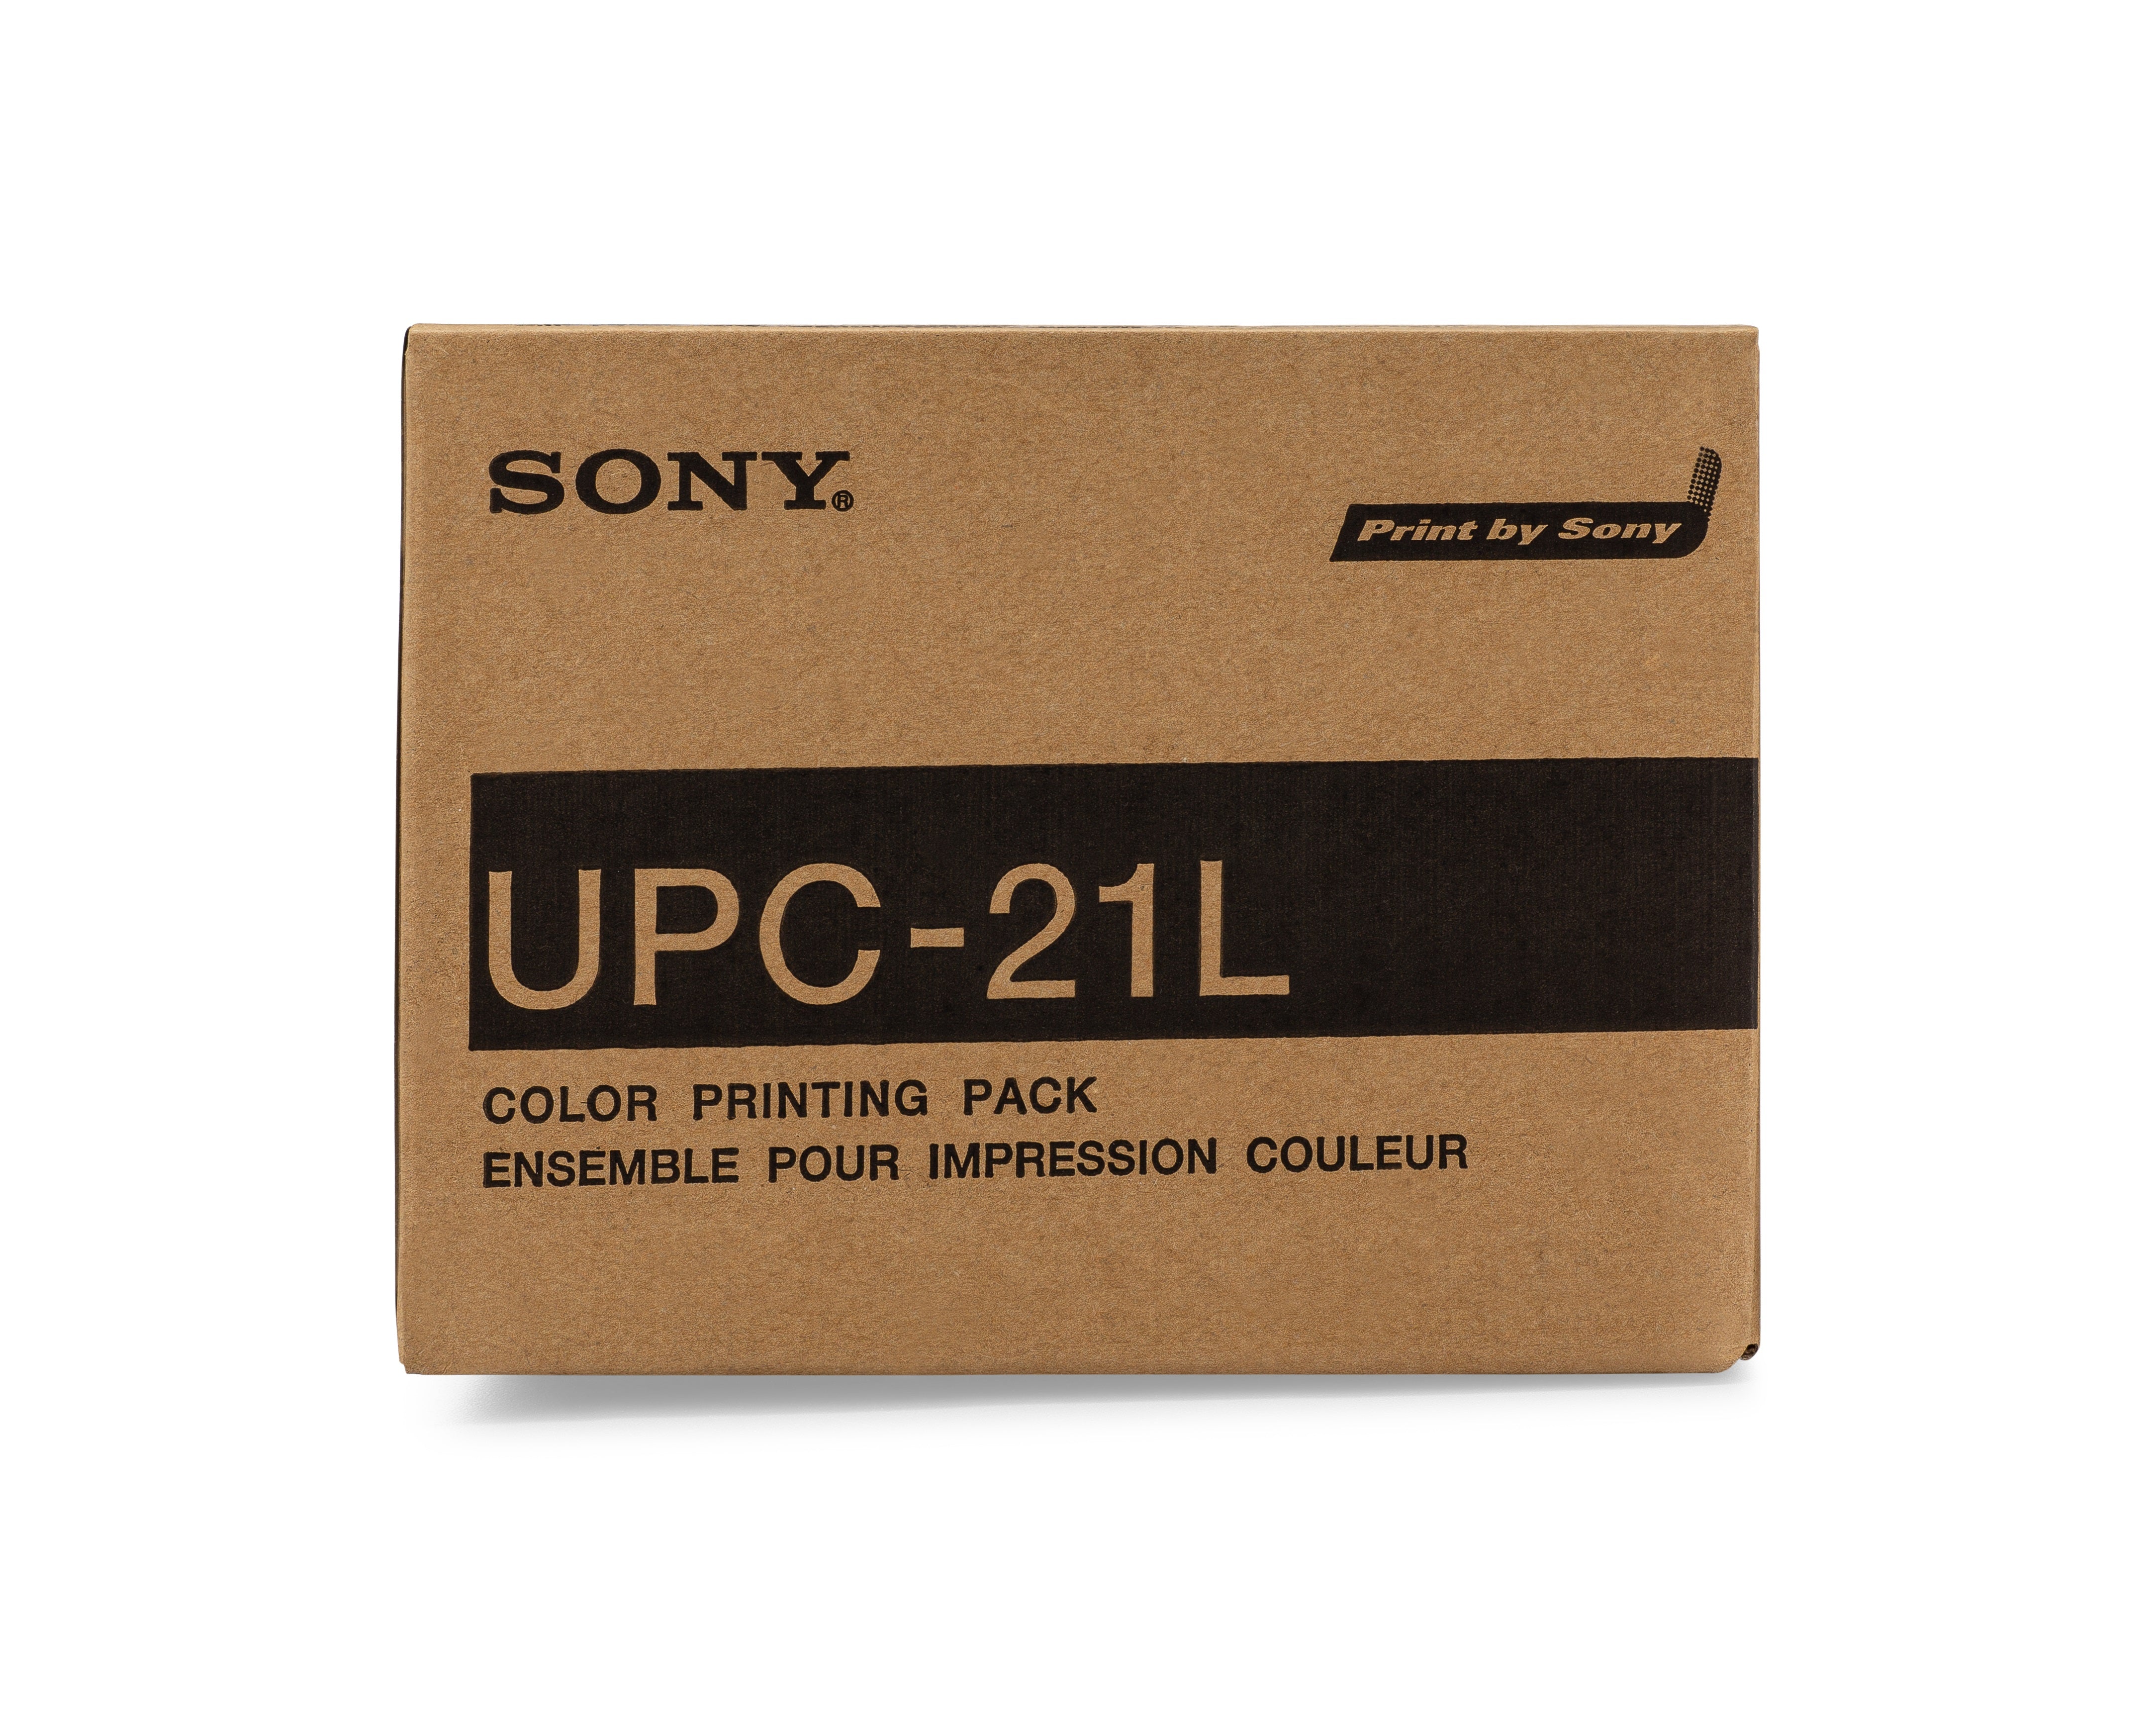 interpersonel motor smugling Sony UPC-21L Color Printing Pack